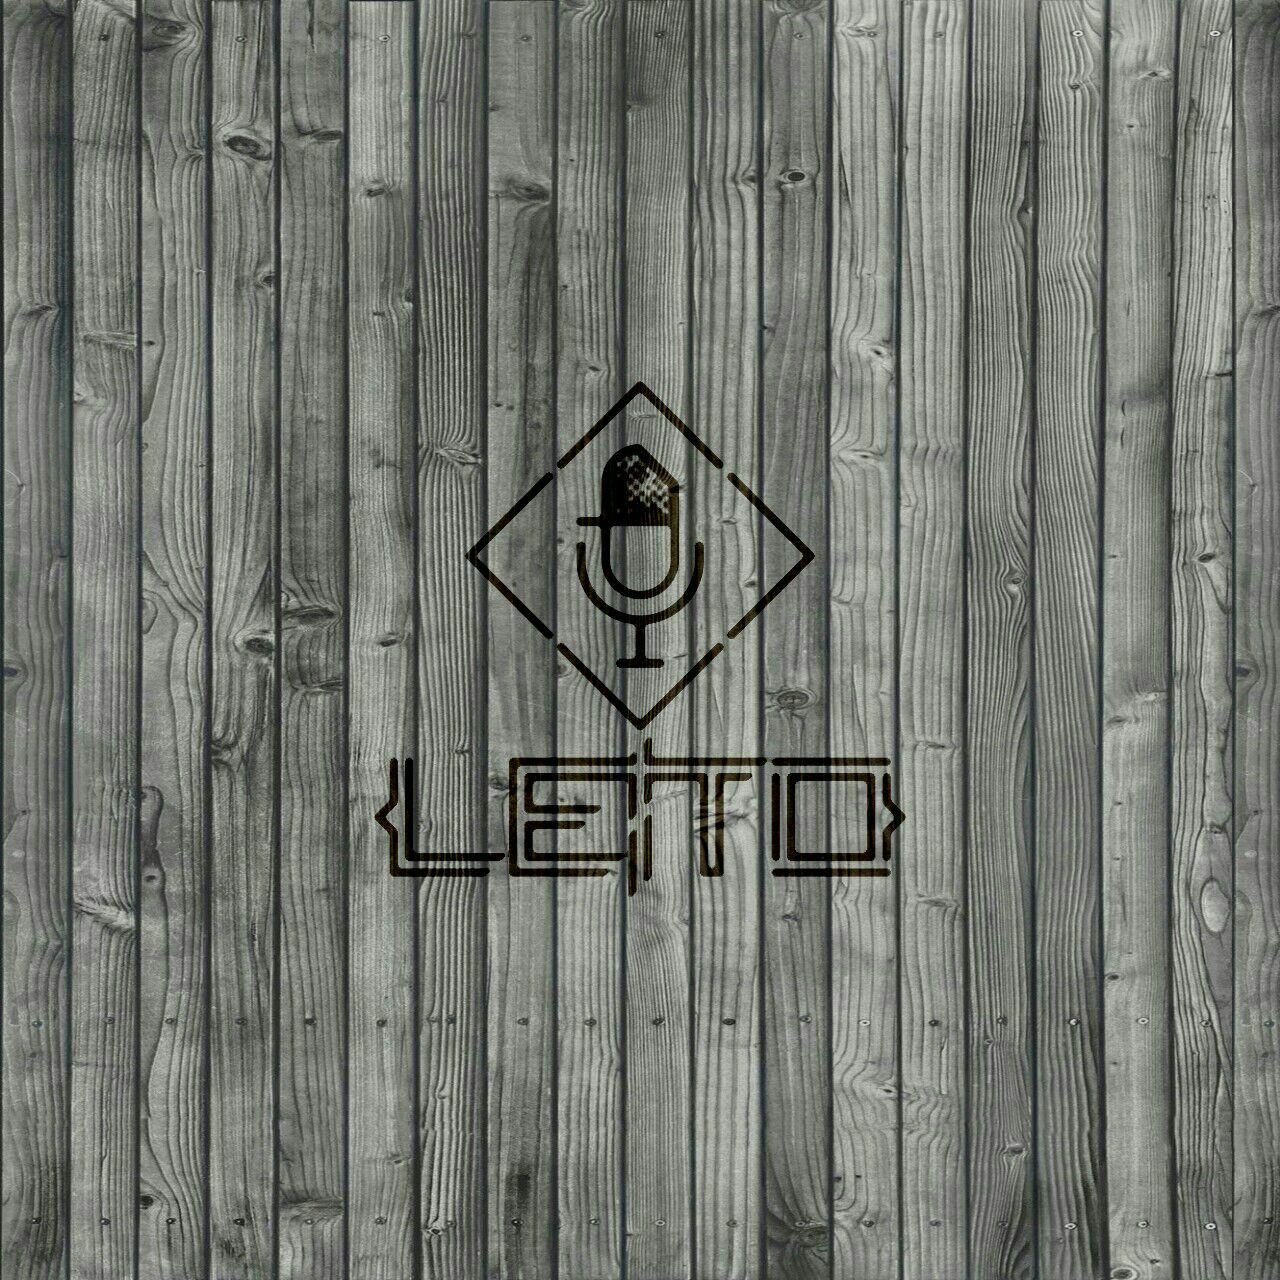 http://up.leito.ir/view/1339636/LeitoLogoWood.jpg